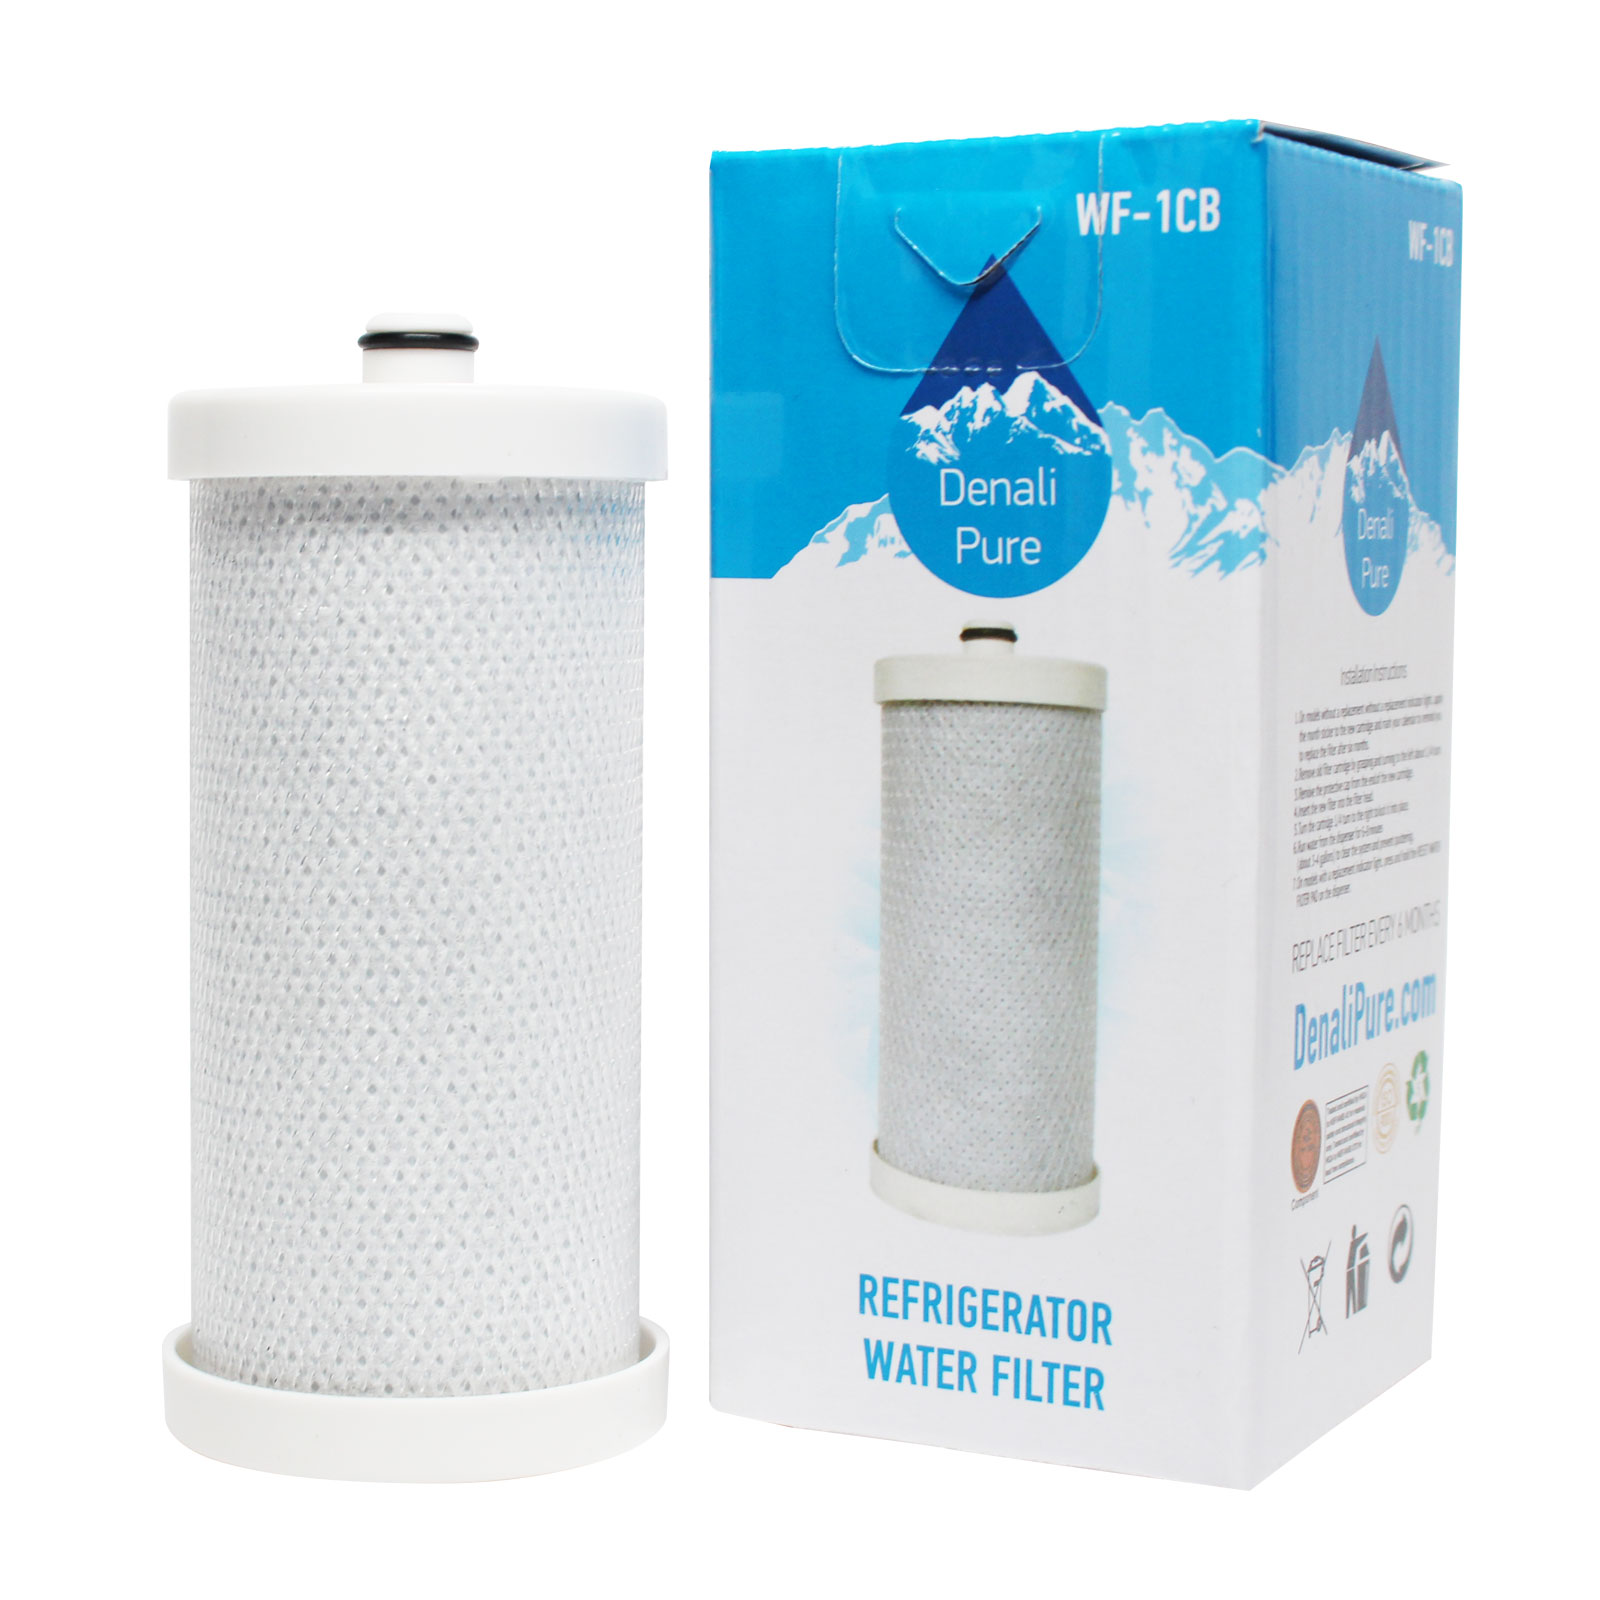 Replacement Frigidaire FRT8WR6EB0 Refrigerator Water Filter - Compatible Frigidaire WF1CB, WFCB Fridge Water Filter Cartridge - image 1 of 4